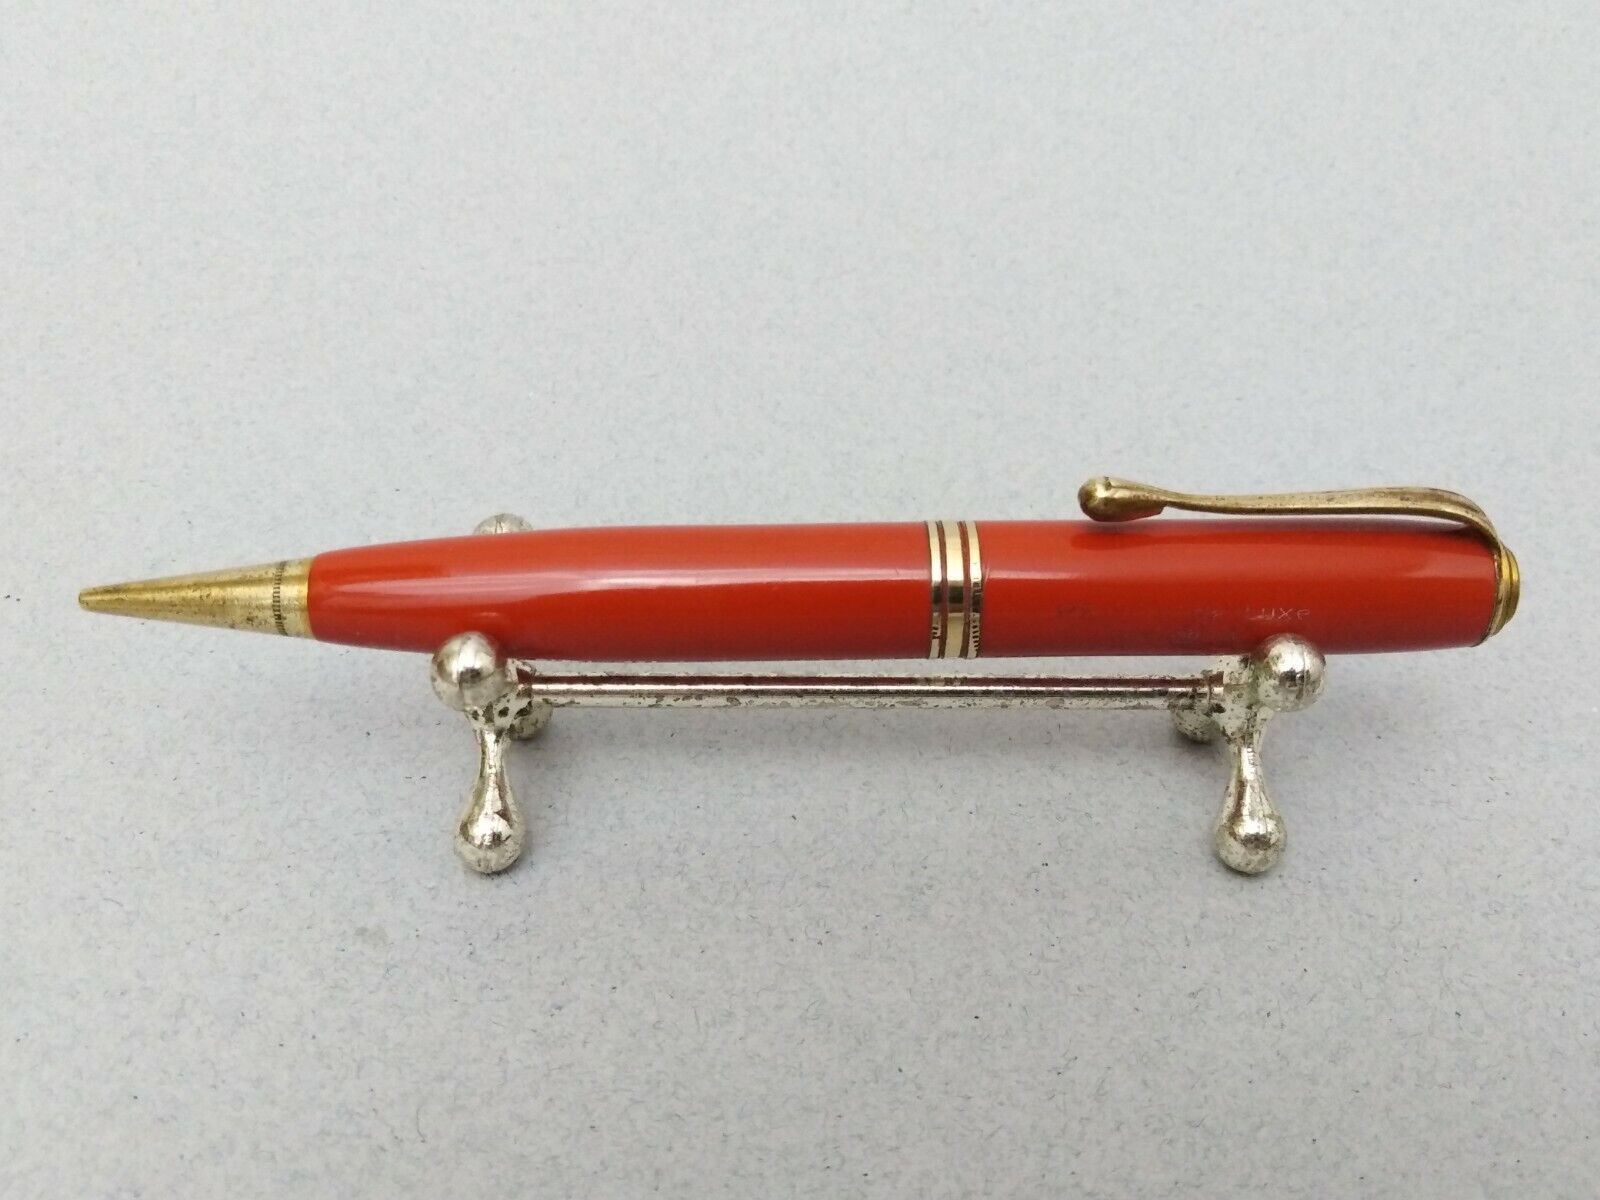 Vintage Rare Collectible Penol Deluxe no.3 Coral Red Mechanical Pencil Danish